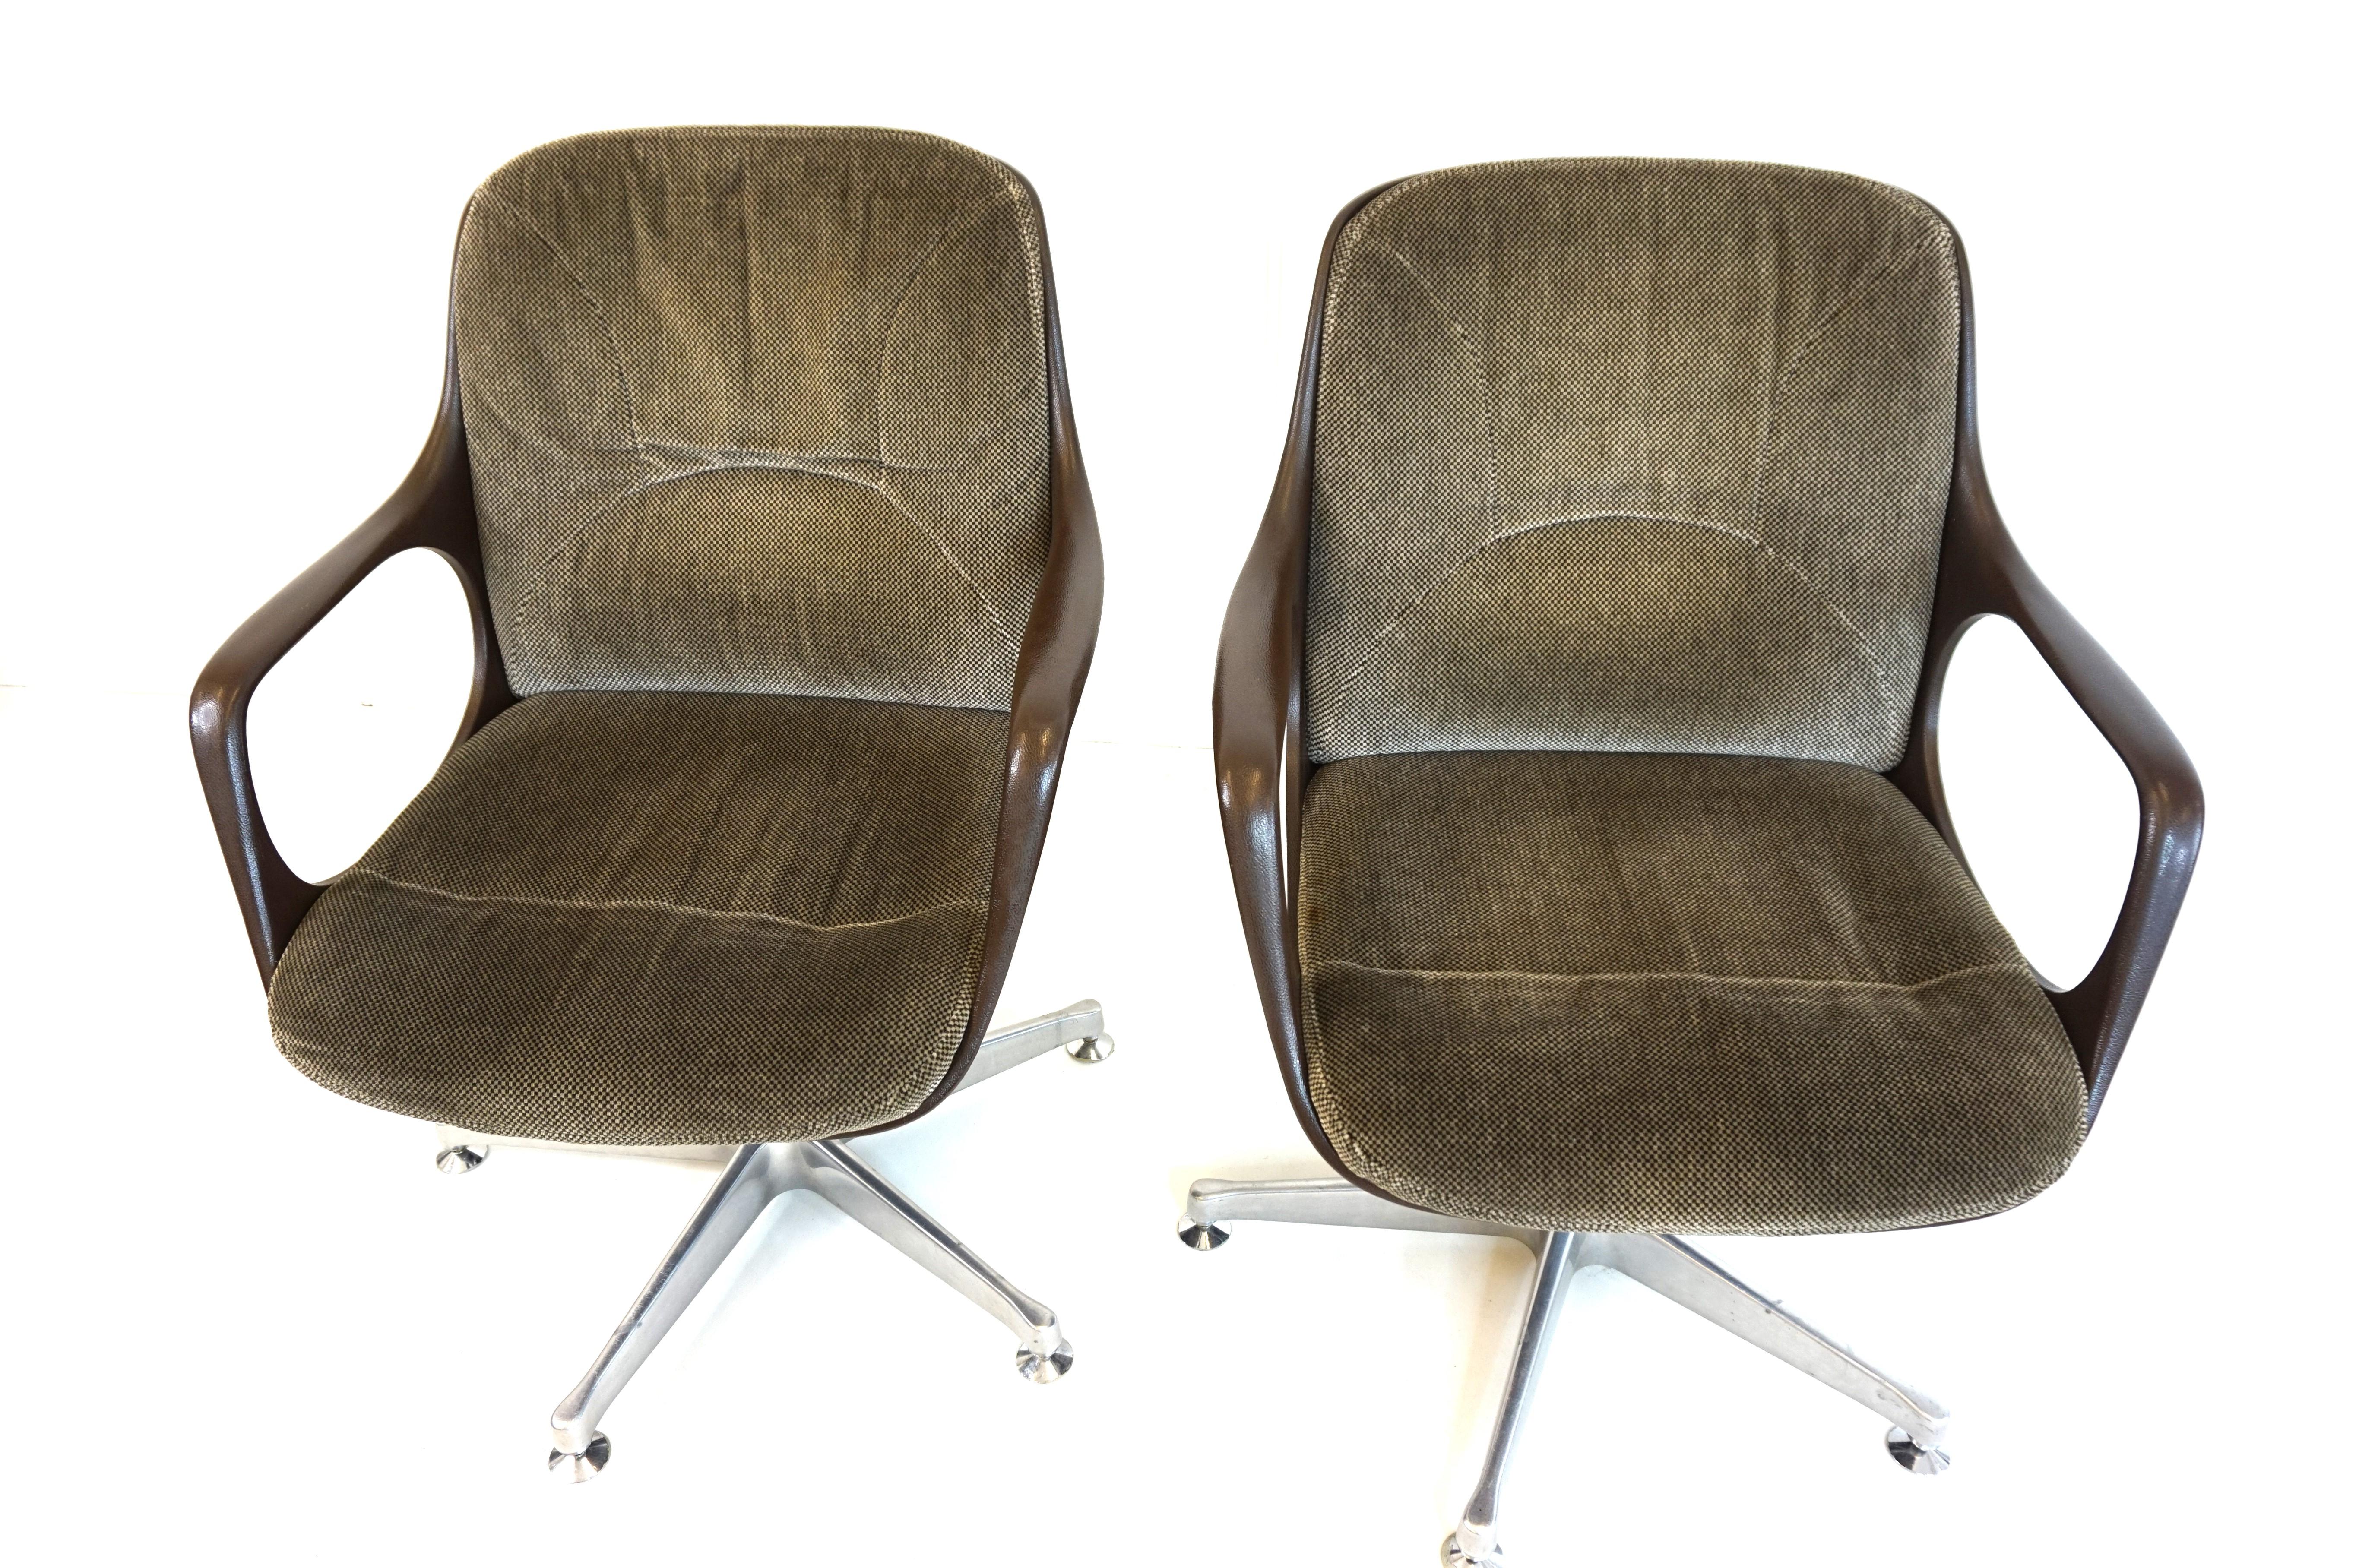 Chromcraft Set of 2 Space Age Office/Dining Room Chairs 6